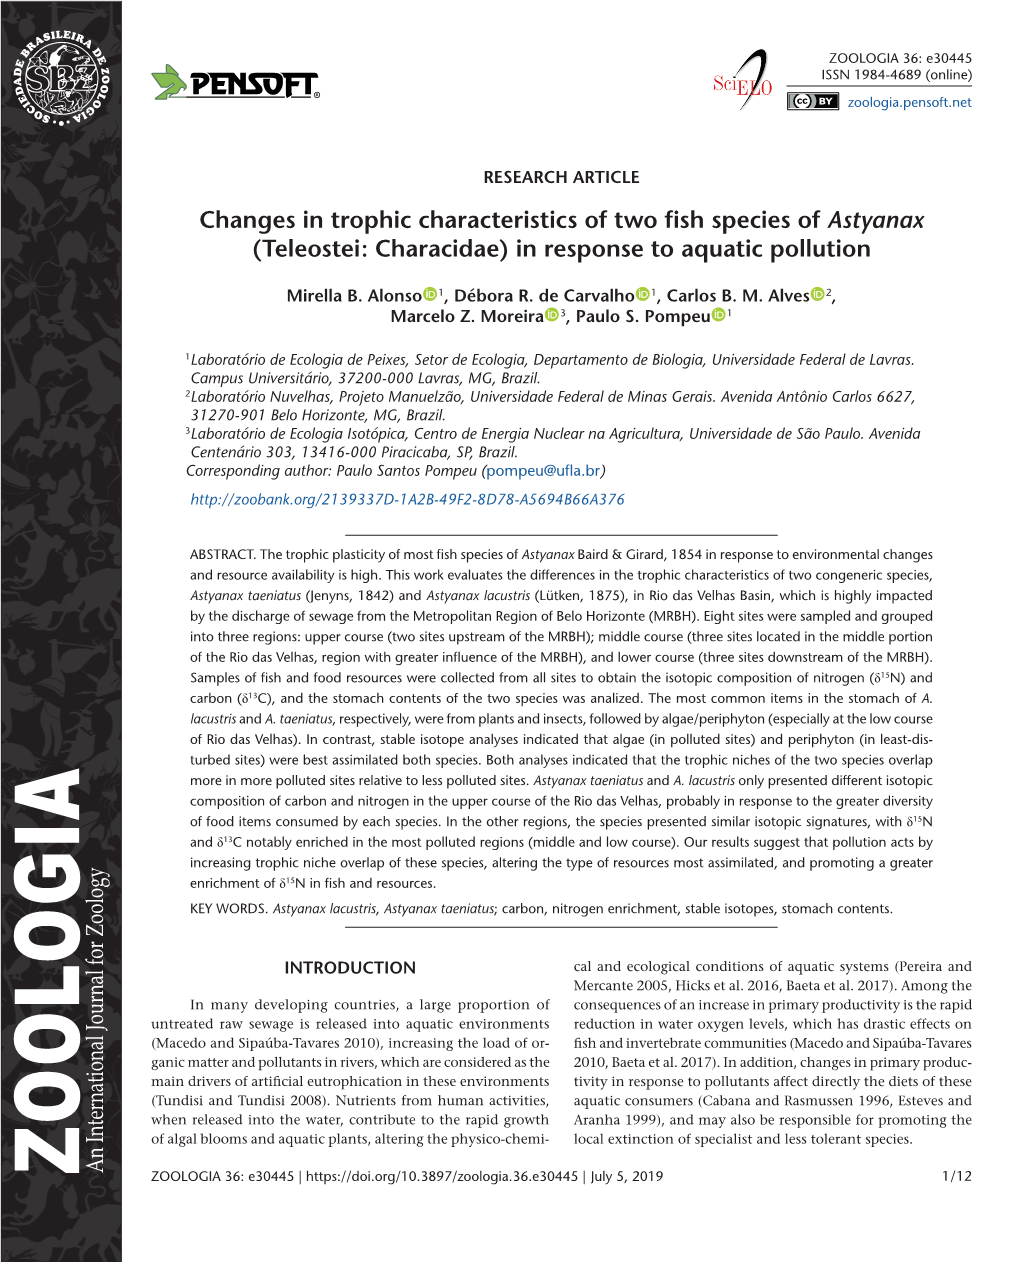 Changes in Trophic Characteristics of Two Fish Species of Astyanax